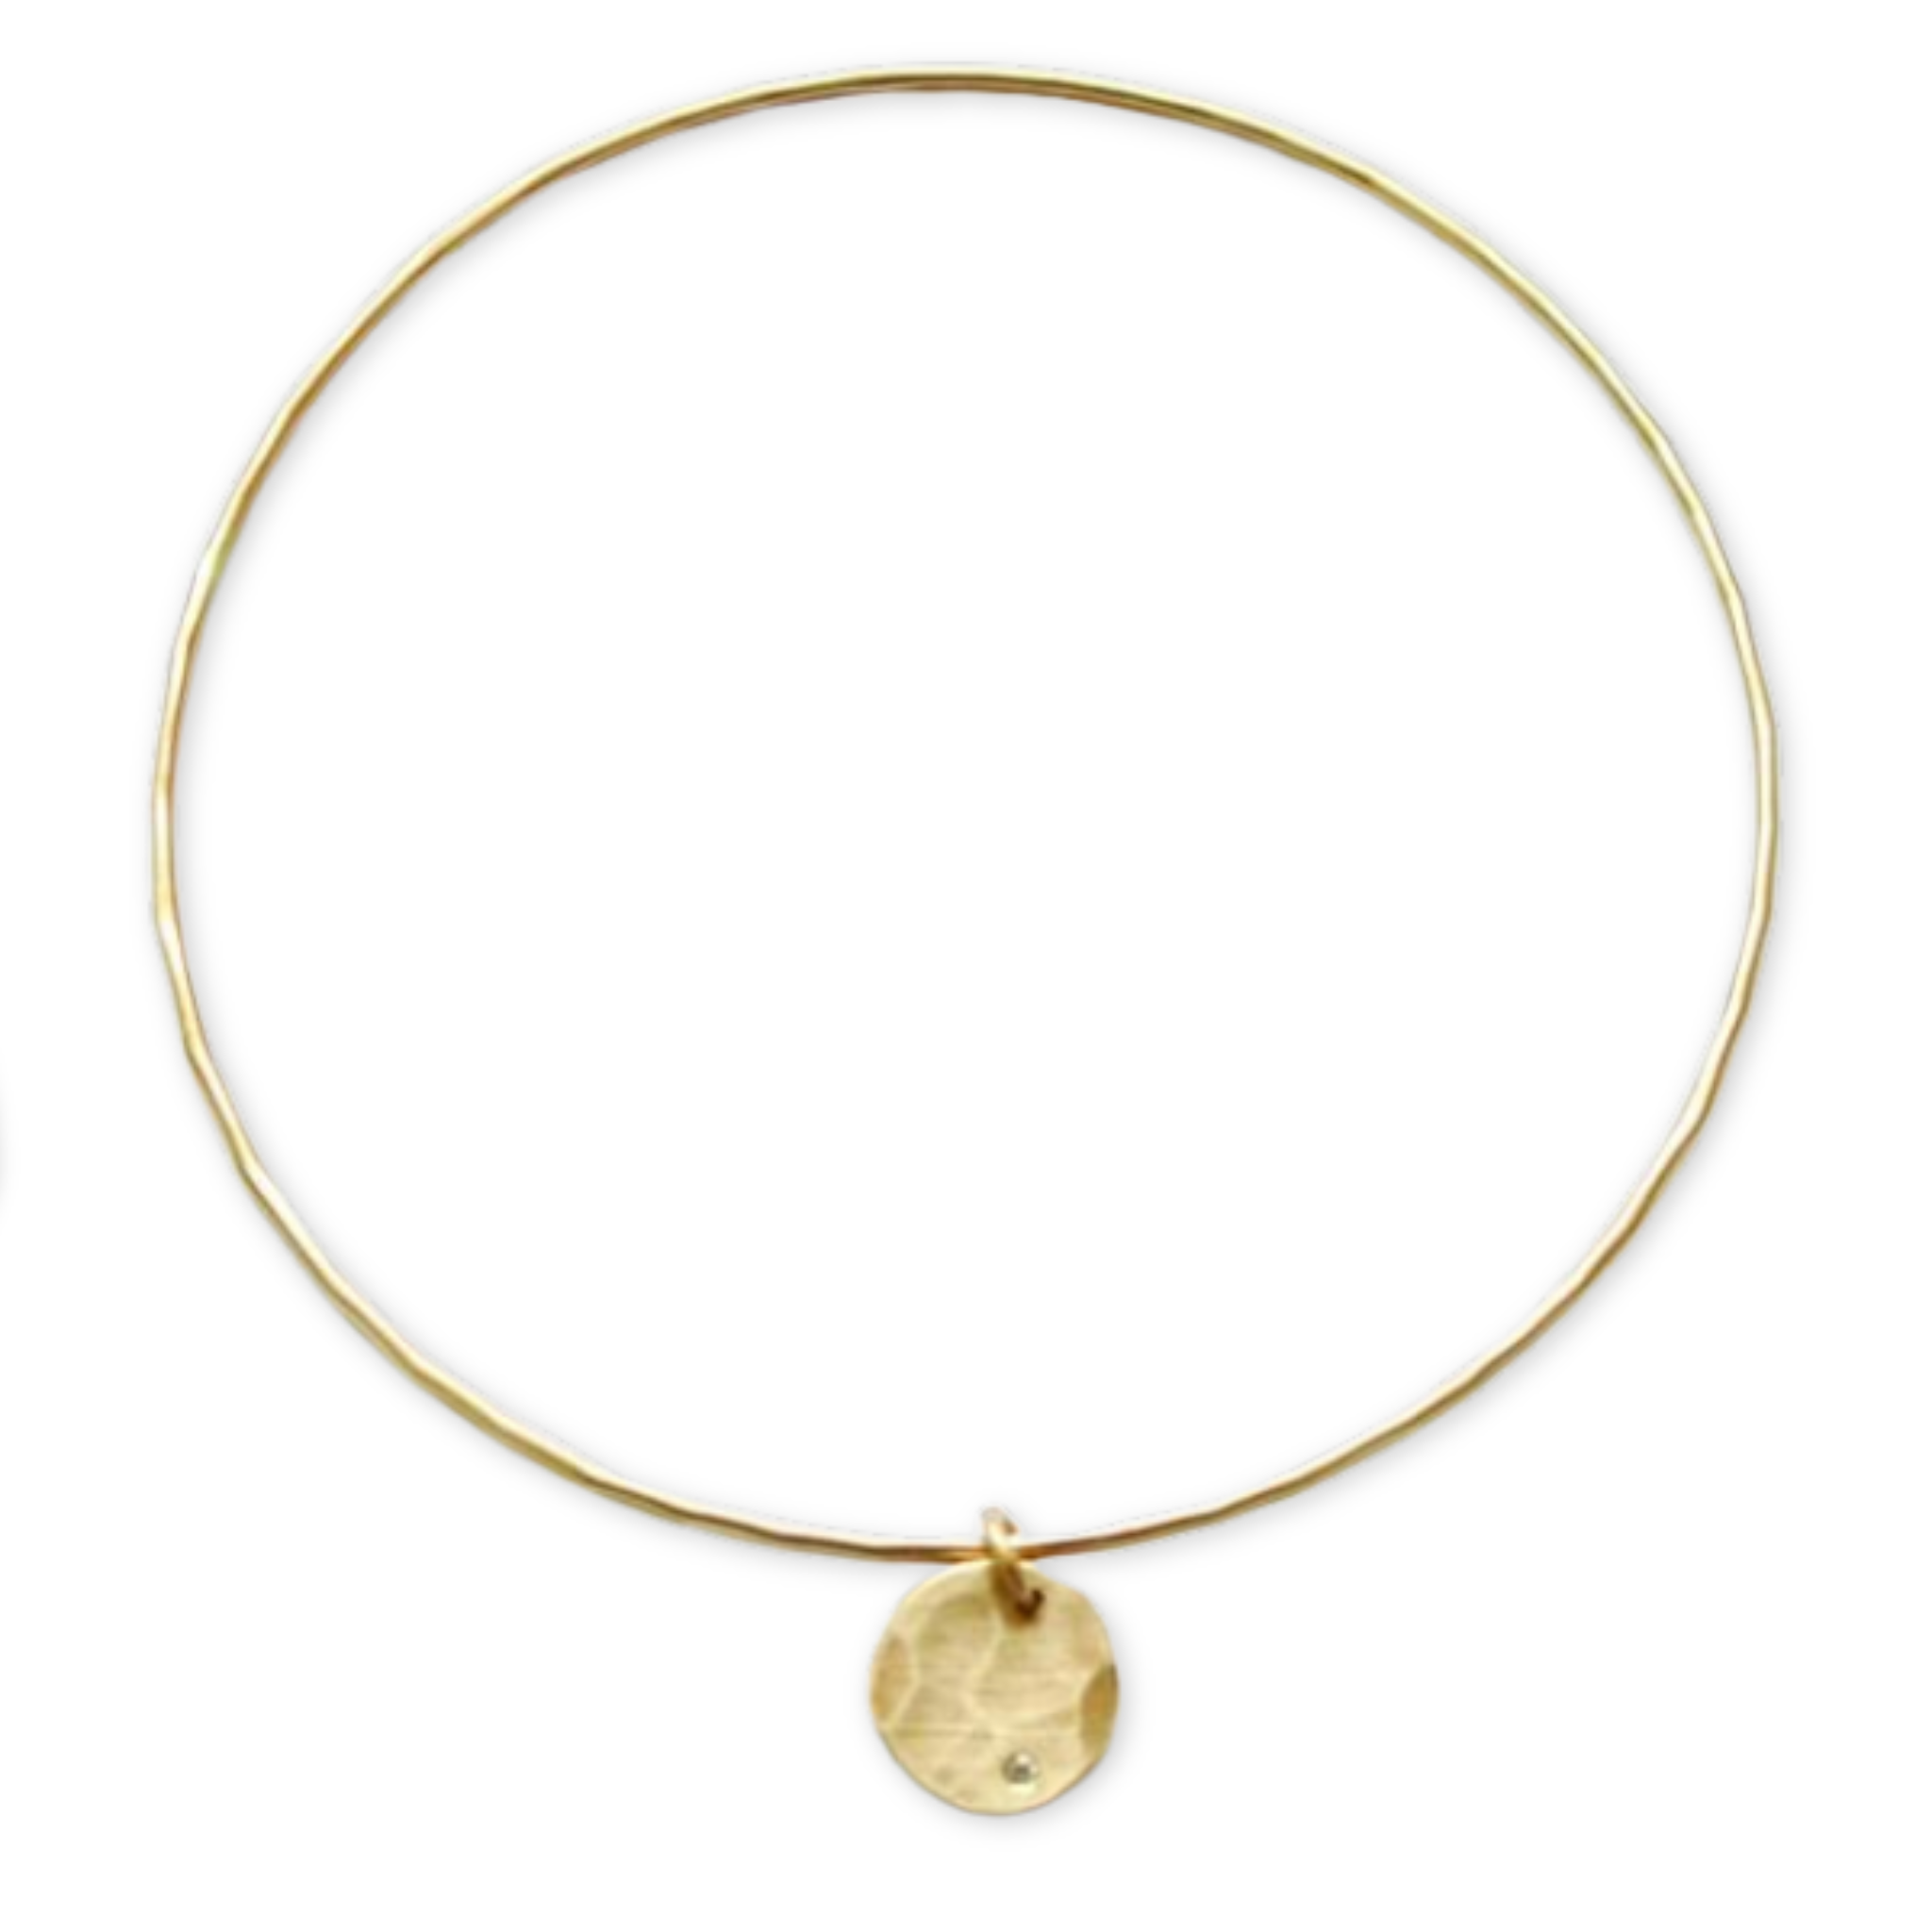 bangle bracelet with a hammered round charm featuring a tiny stone